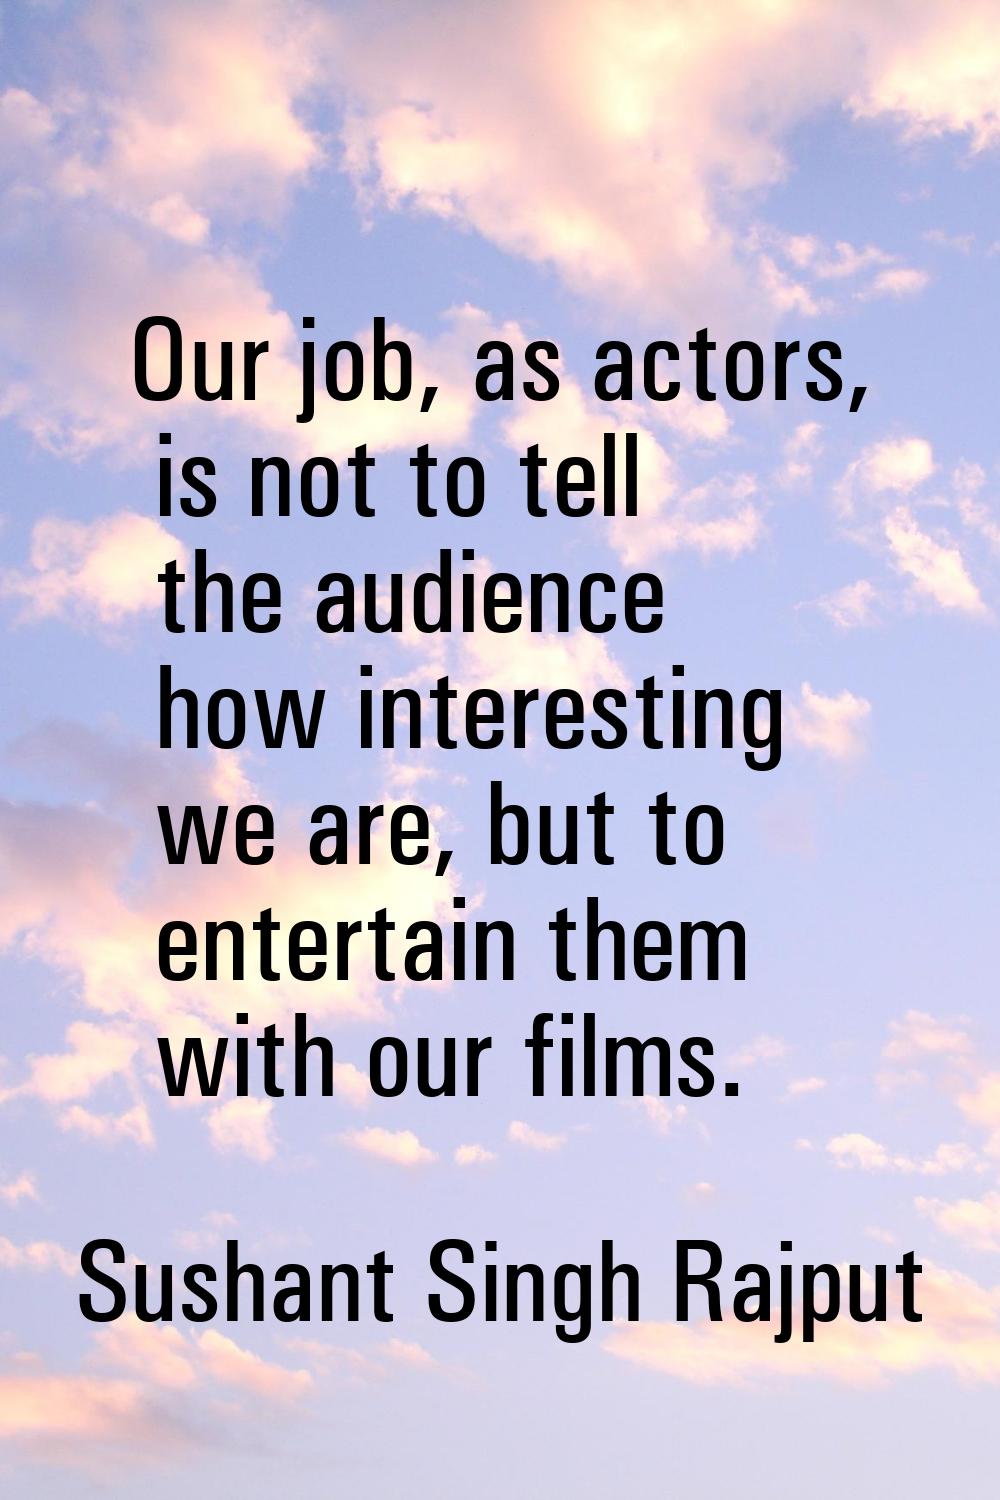 Our job, as actors, is not to tell the audience how interesting we are, but to entertain them with 